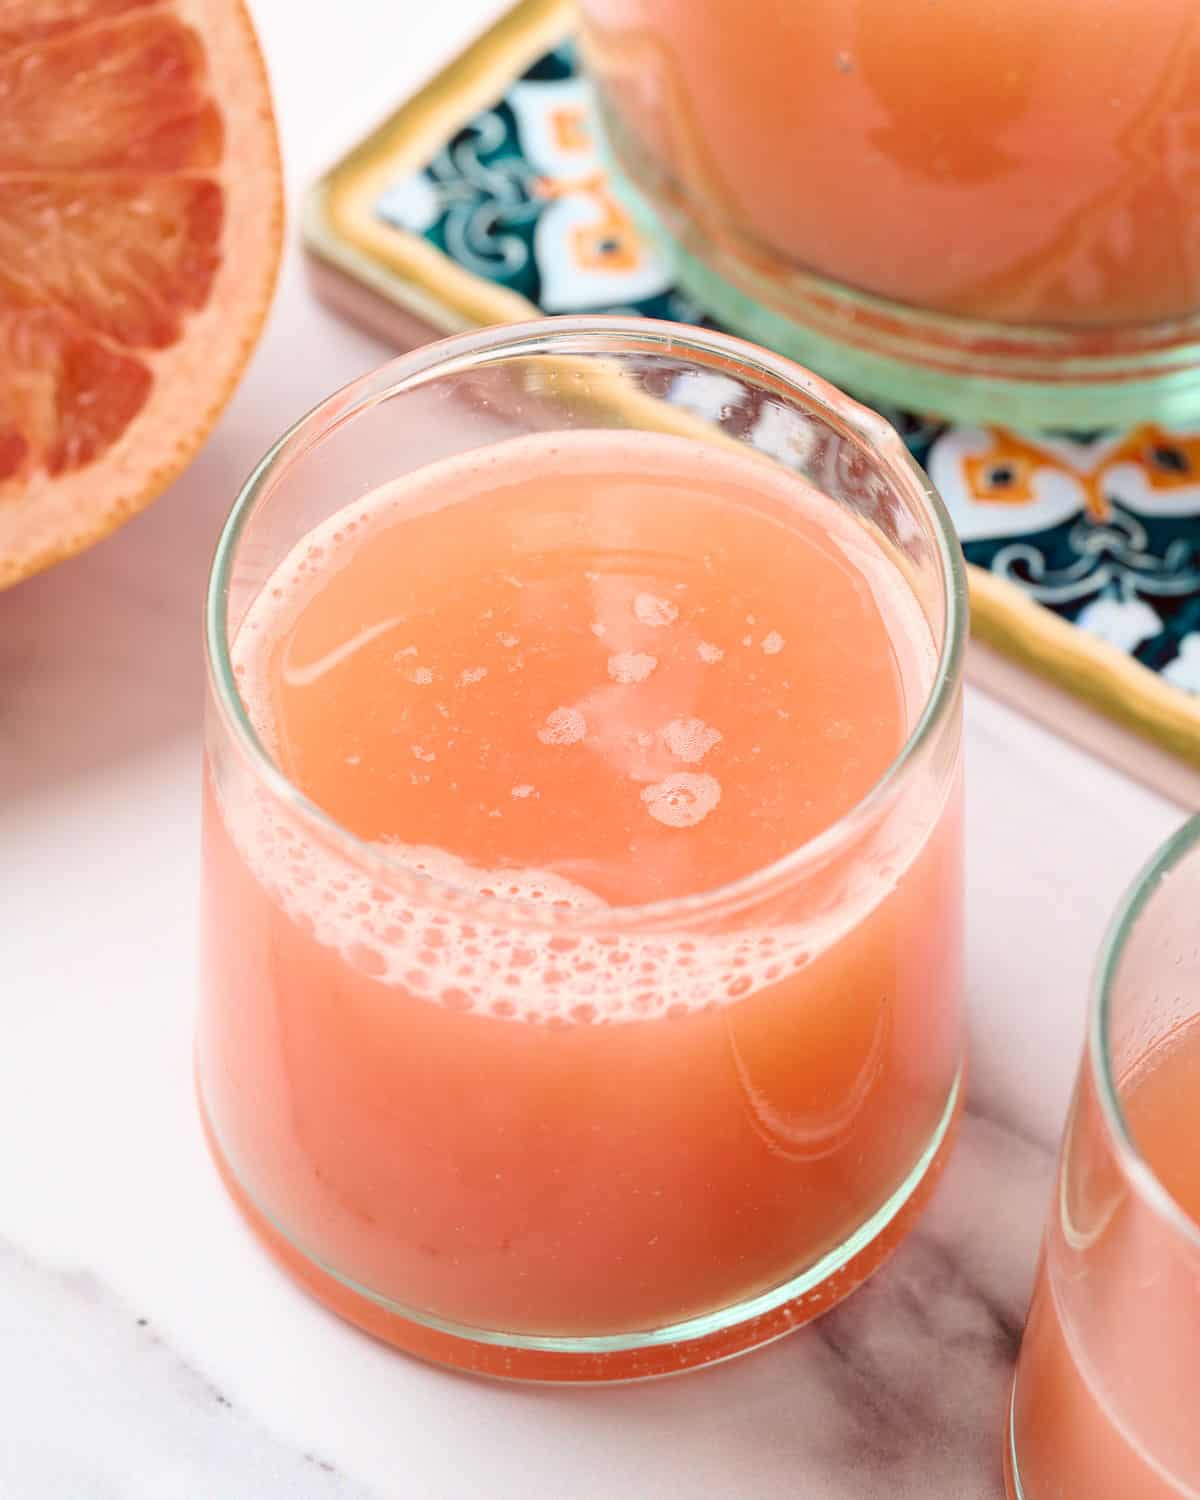 Fresh squeezed grapefruit juice in a glass.